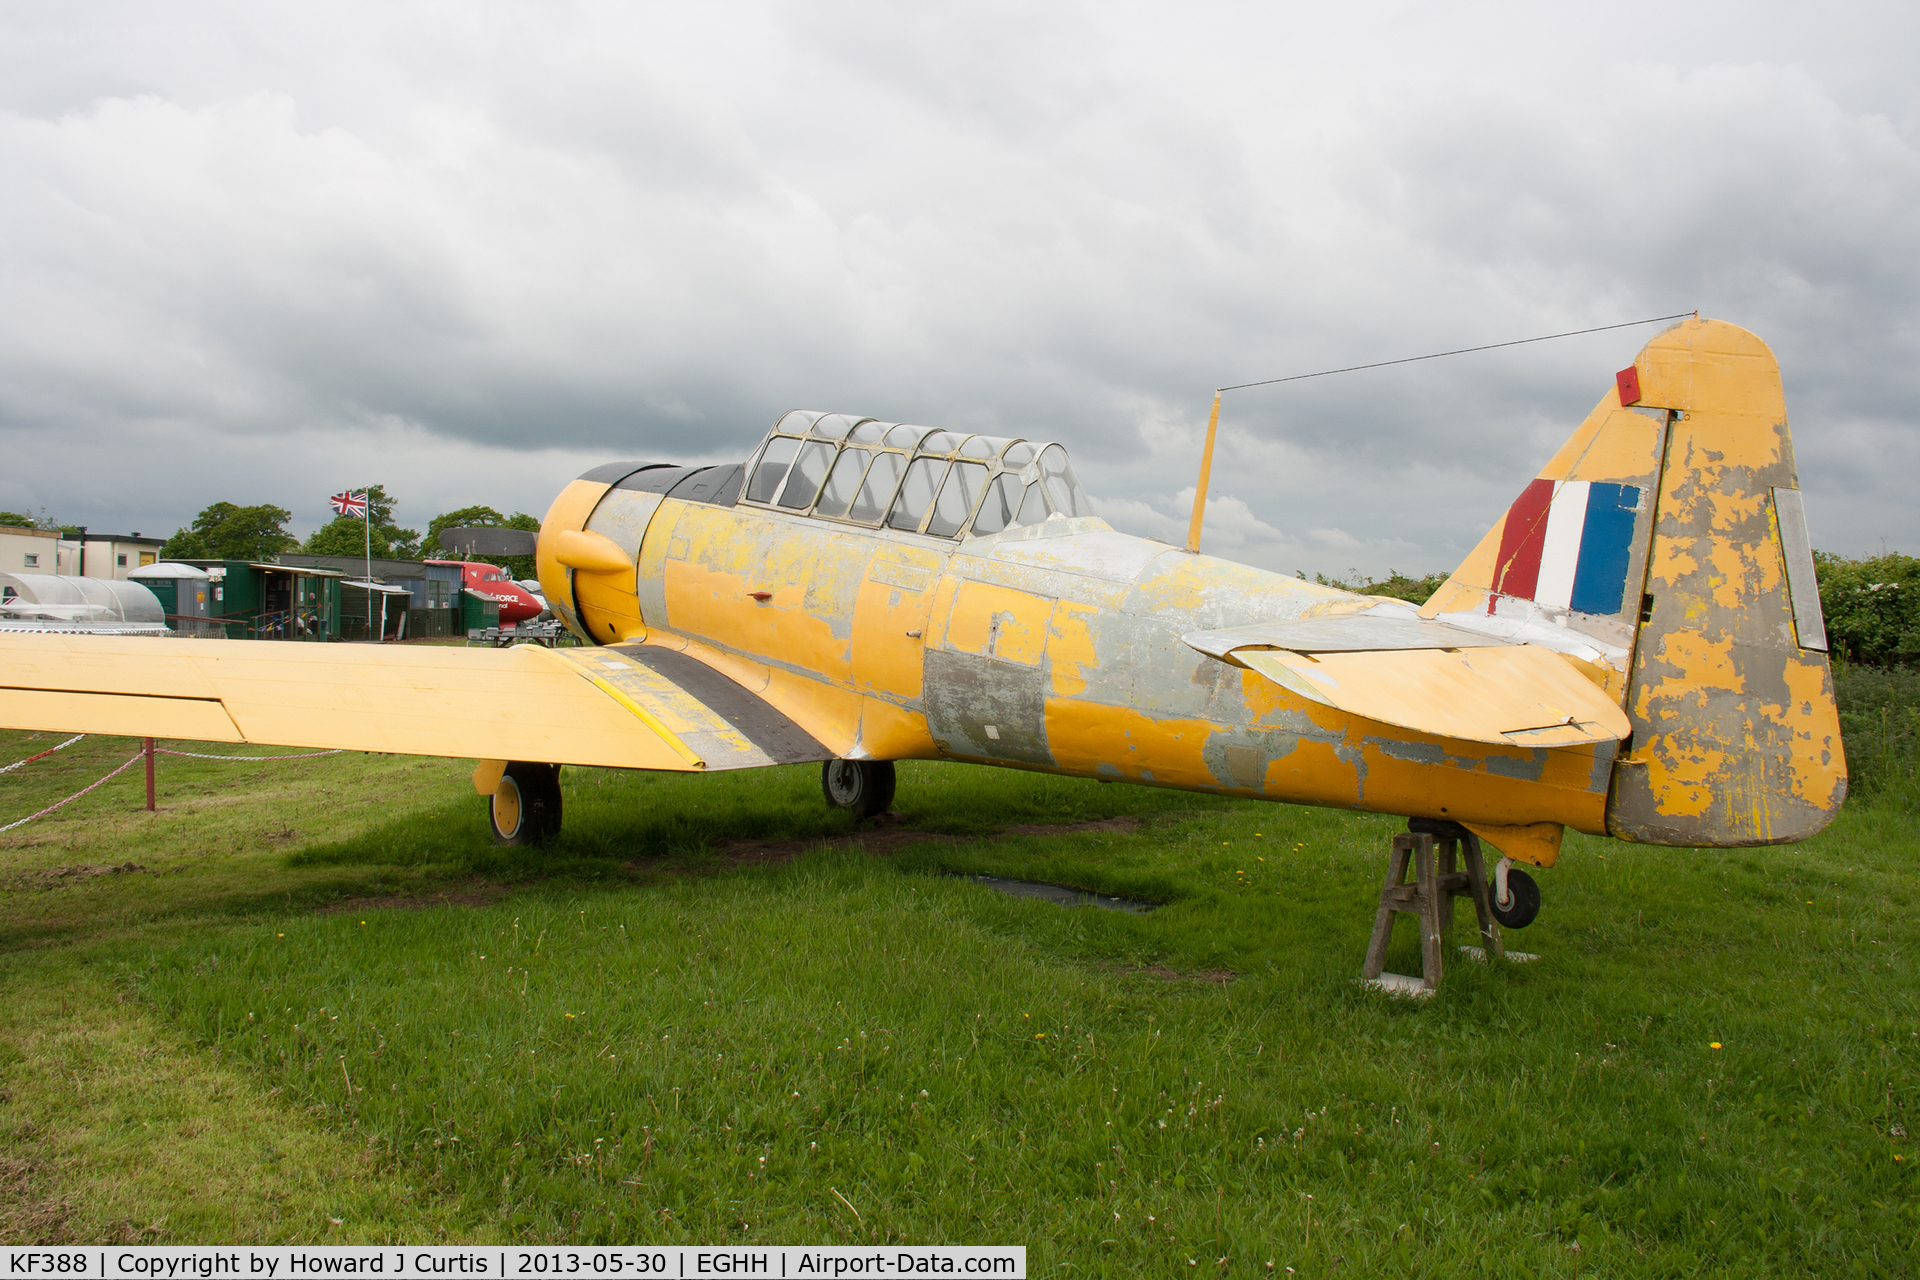 KF388, North American Harvard IIB C/N Composite, At the Bournemouth Aviation Museum, undergoing a repaint.